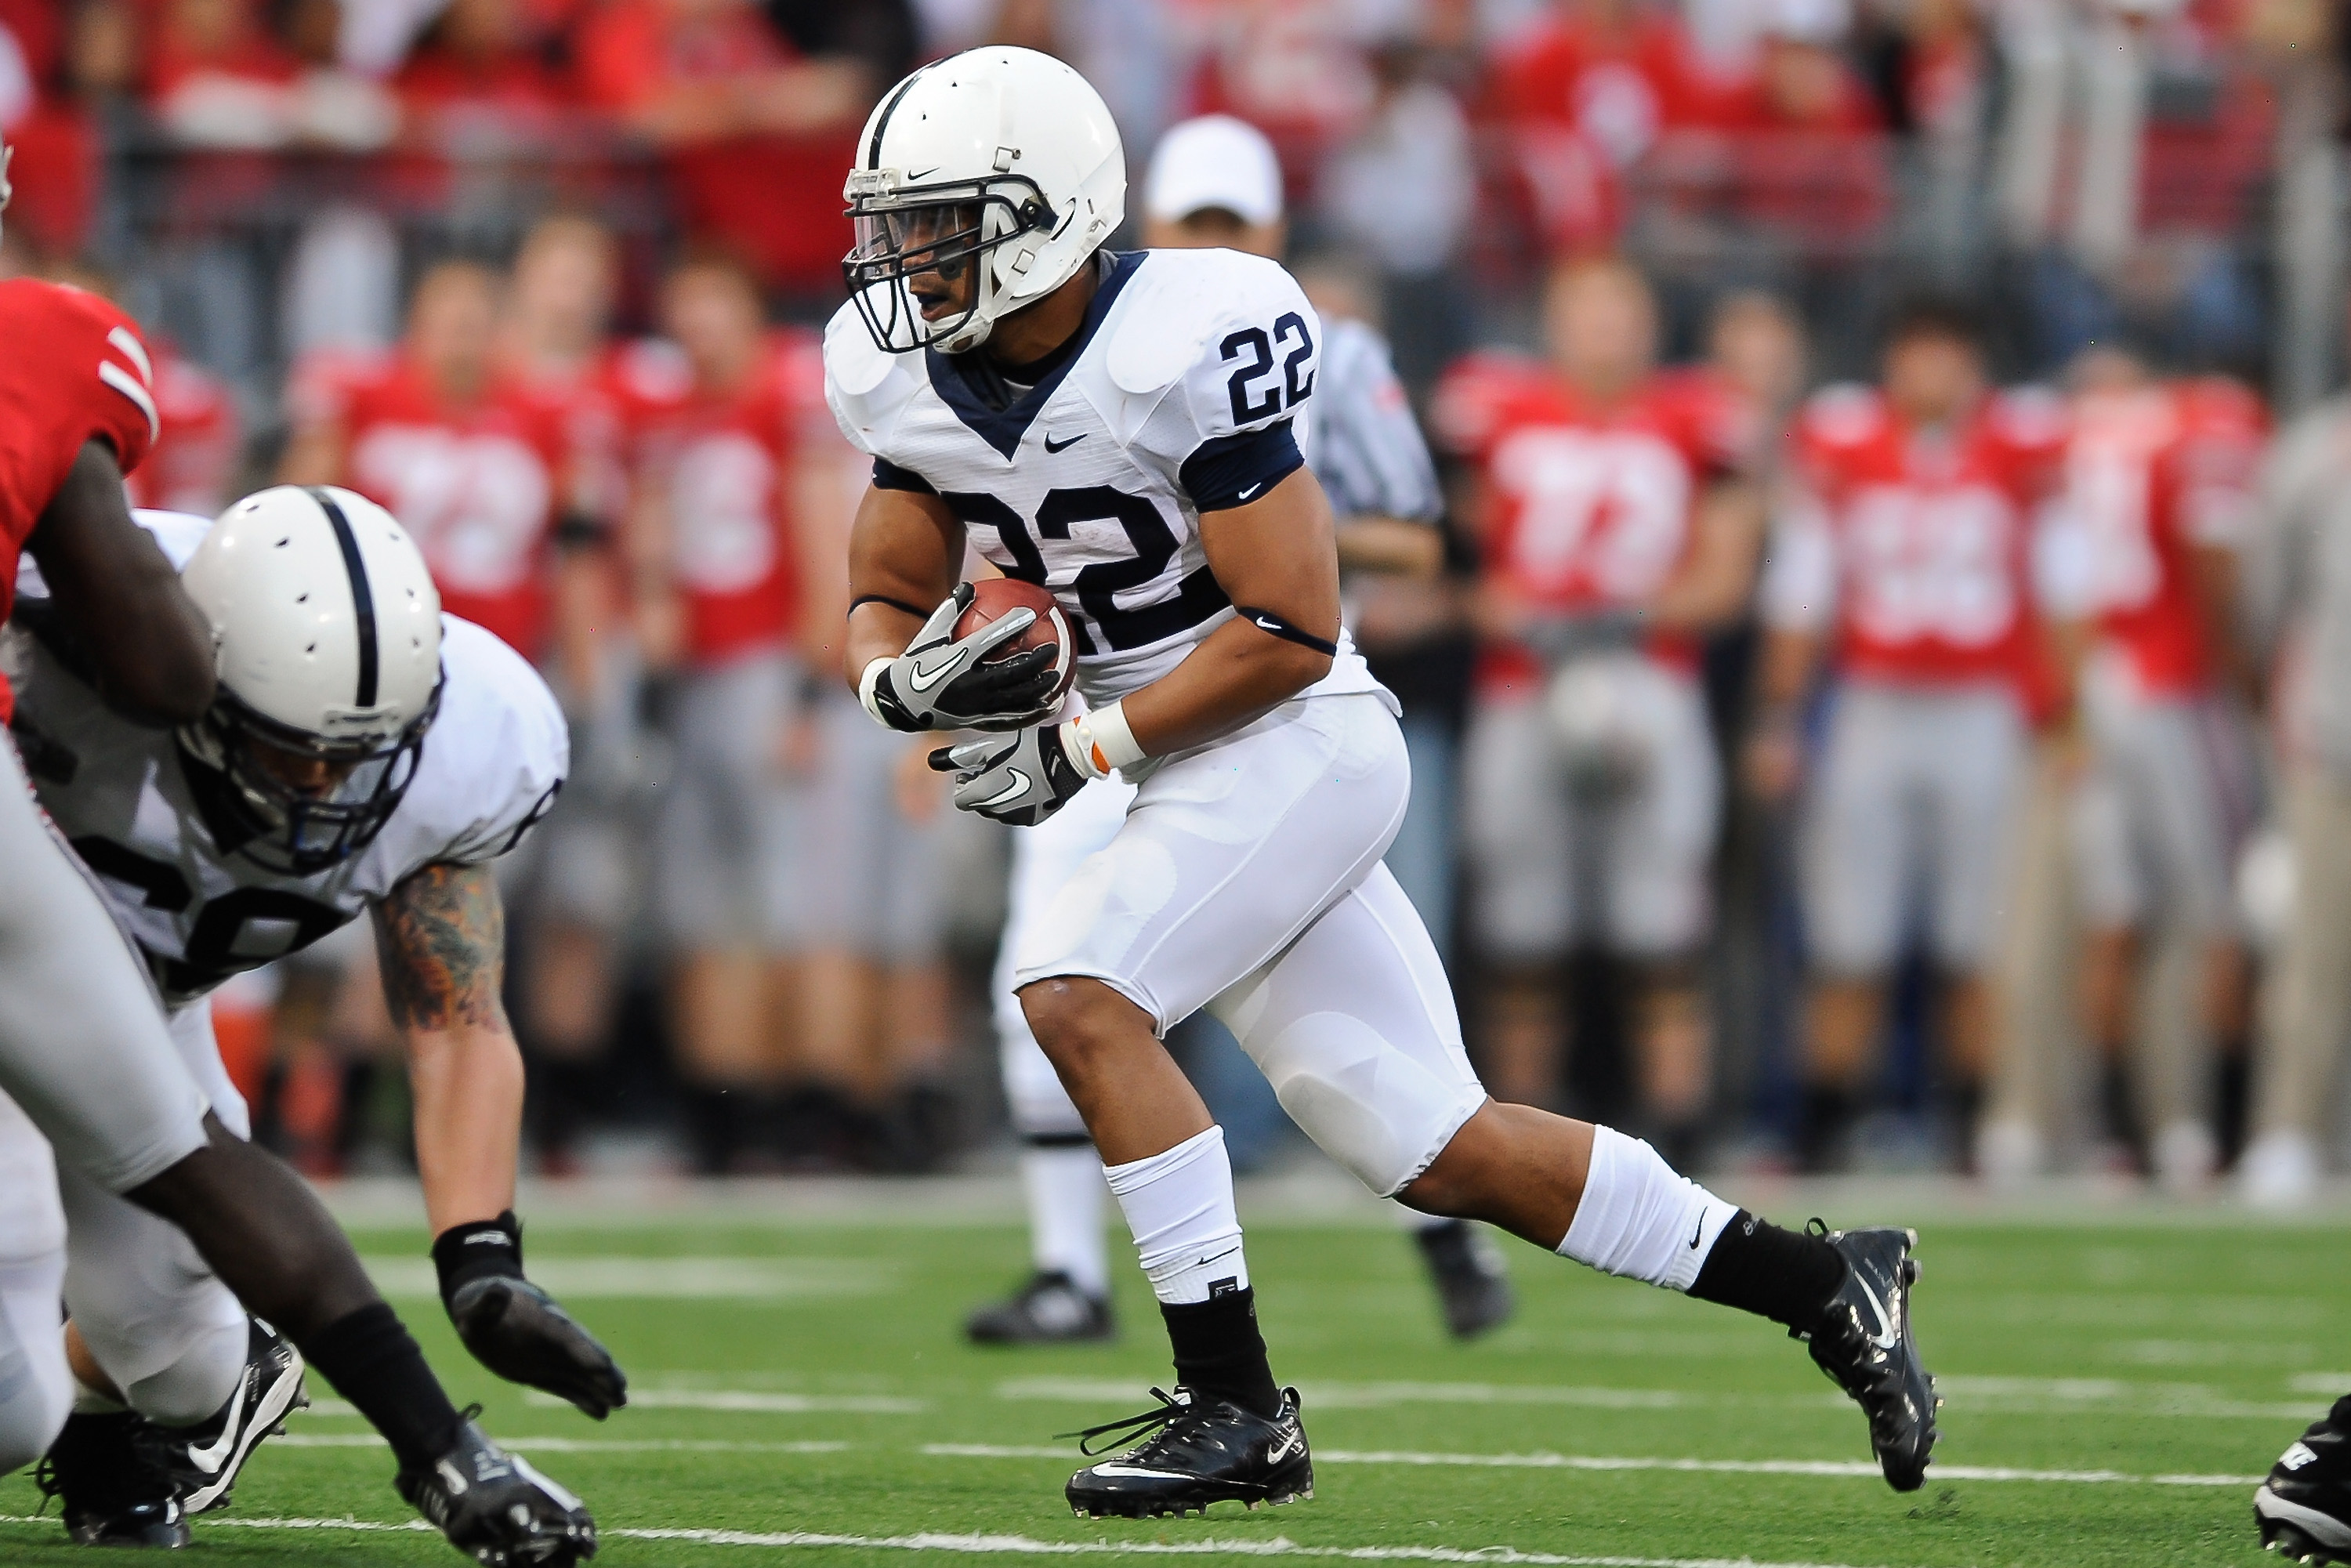 COLUMBUS, OH - NOVEMBER 13:  Evan Royster #22 of the Penn State Nittany Lions runs with the ball against the Ohio State Buckeyes at Ohio Stadium on November 13, 2010 in Columbus, Ohio.  (Photo by Jamie Sabau/Getty Images)